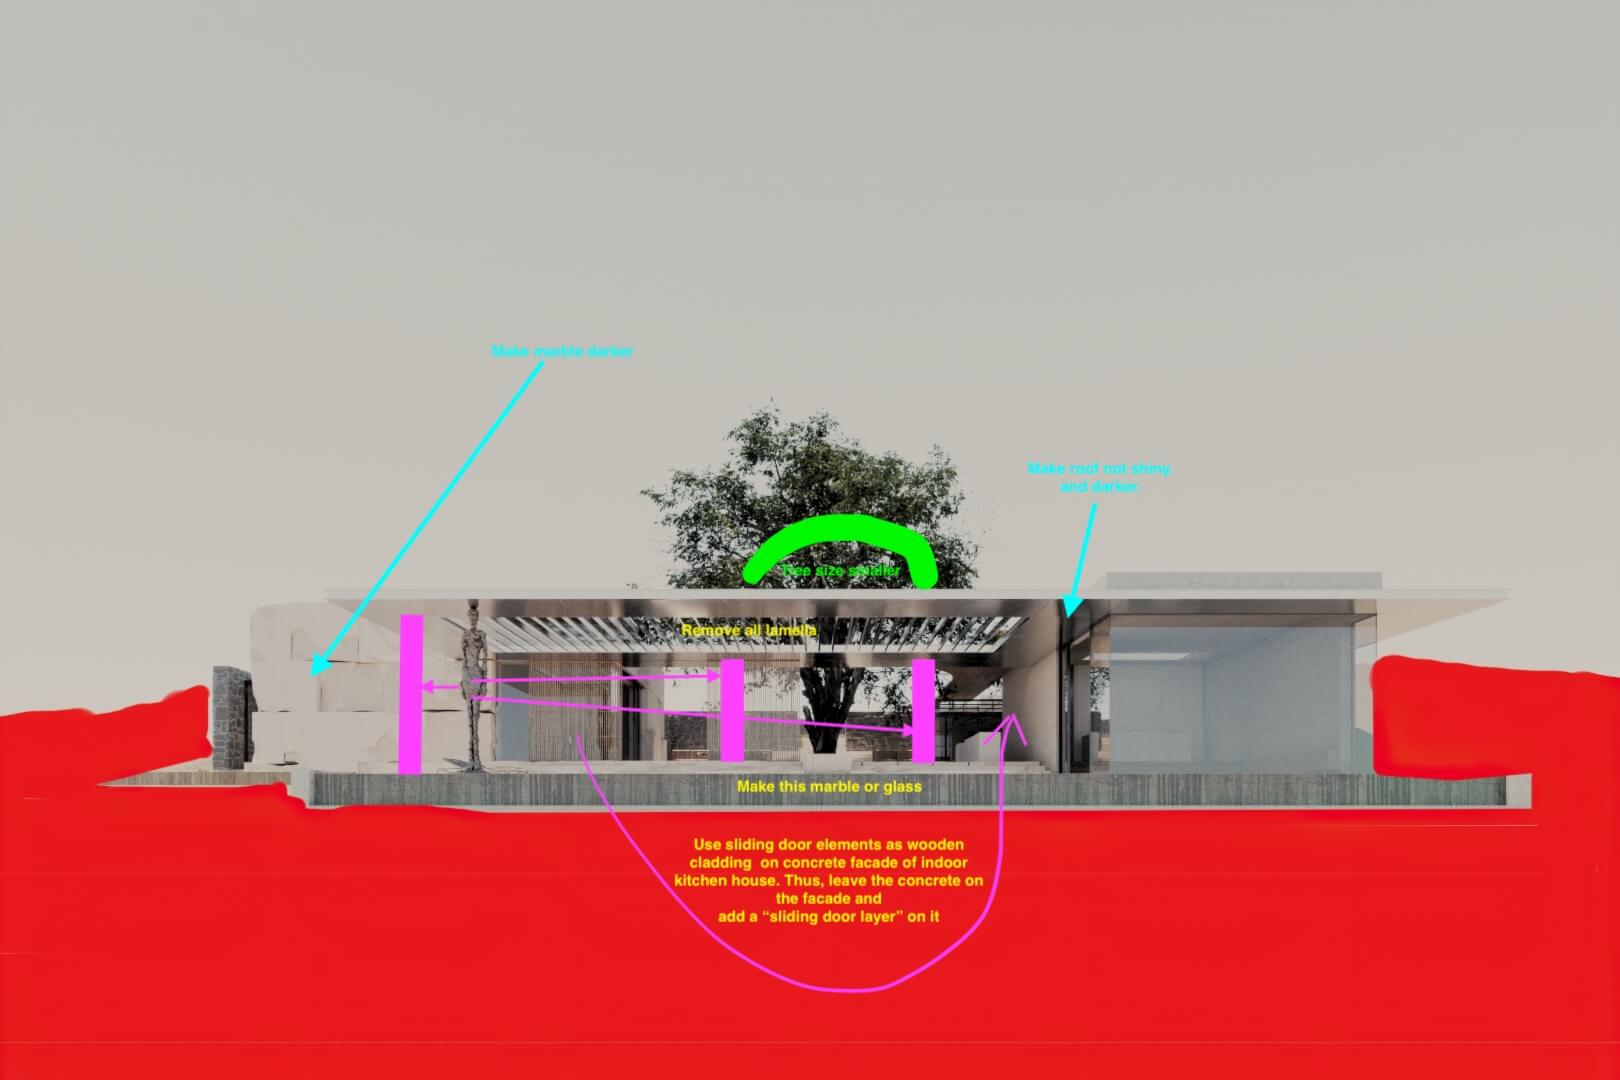 A Draft Rendering of a House with Corrections